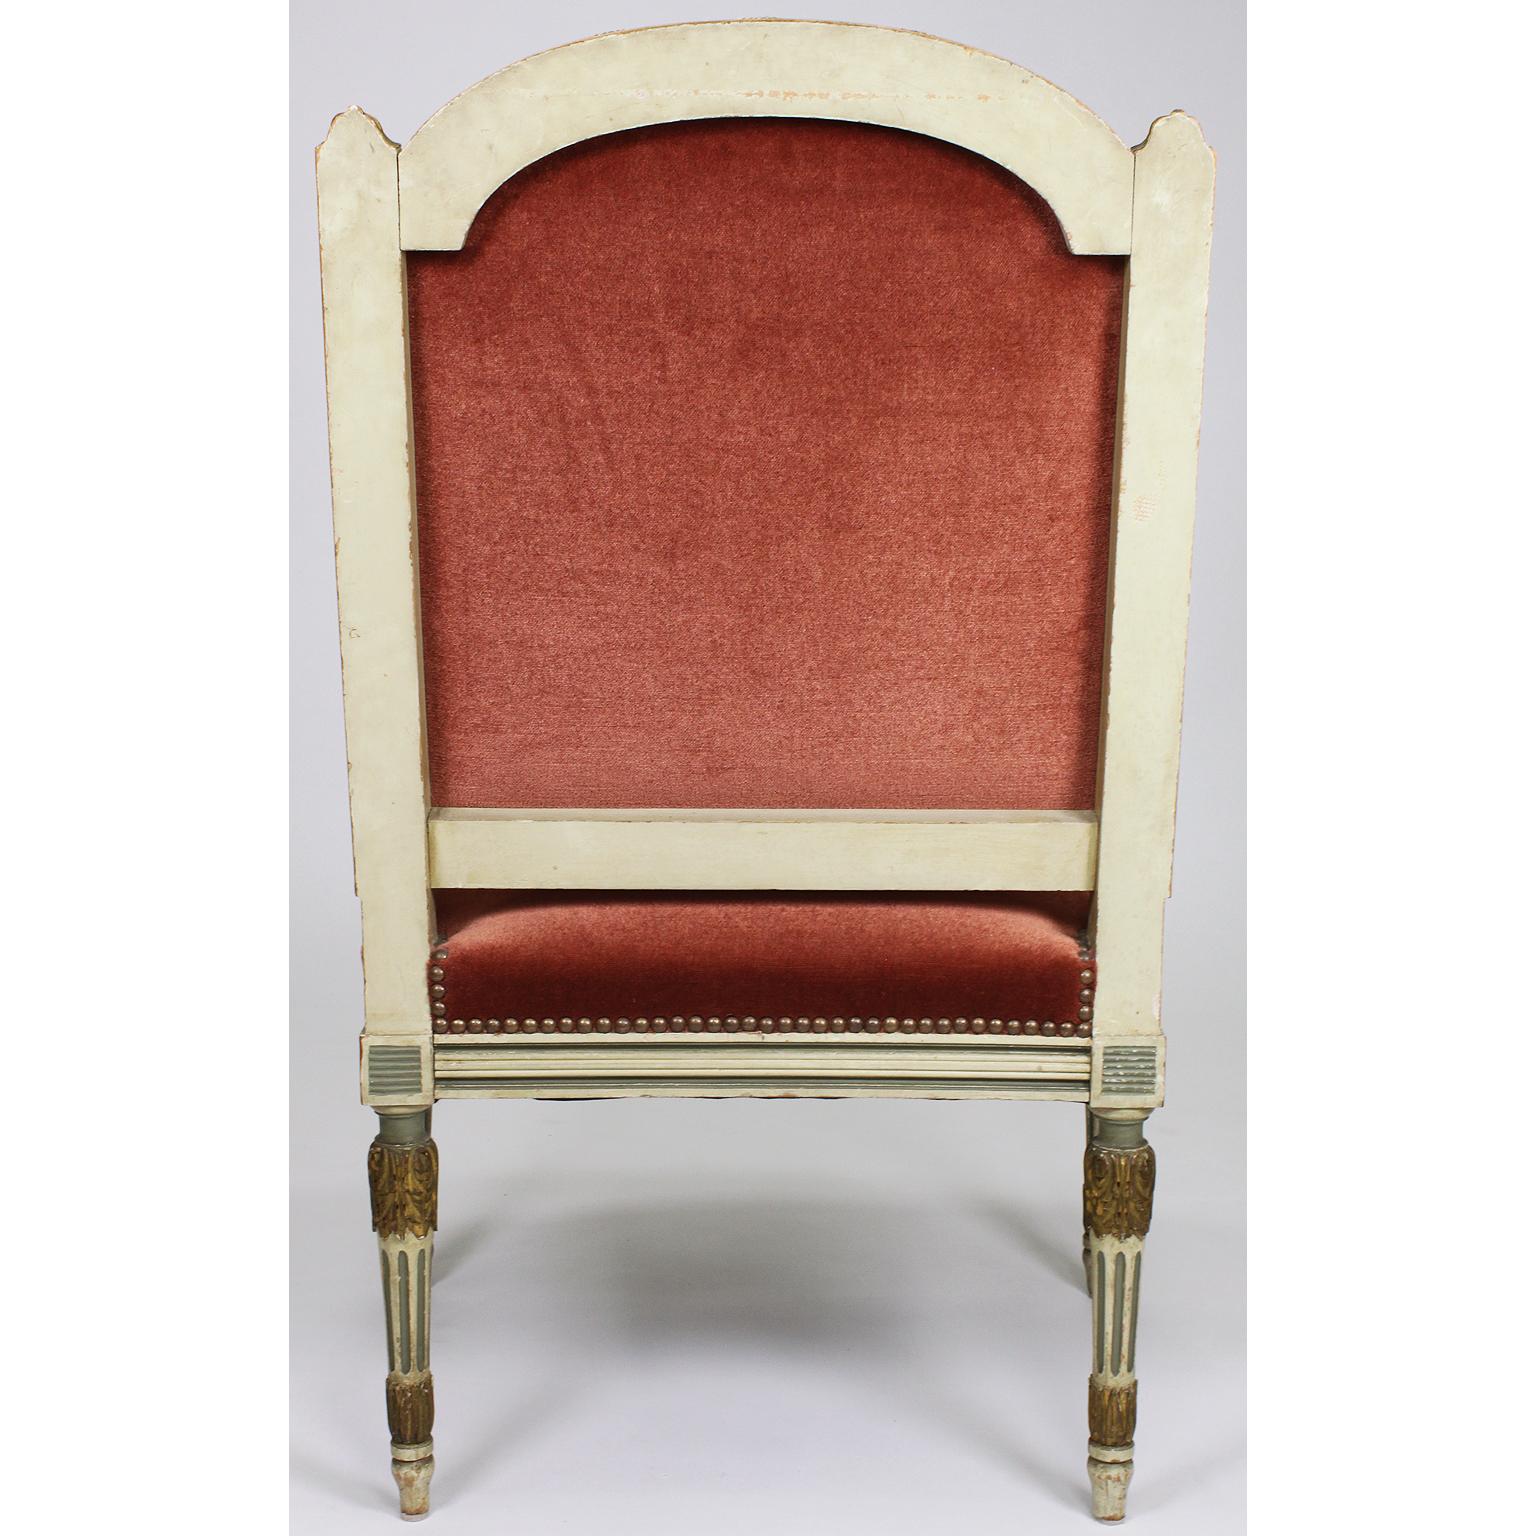 Pair of French Louis XVI Style Gilt, Cream /Green Painted Fauteuils Armchairs For Sale 2